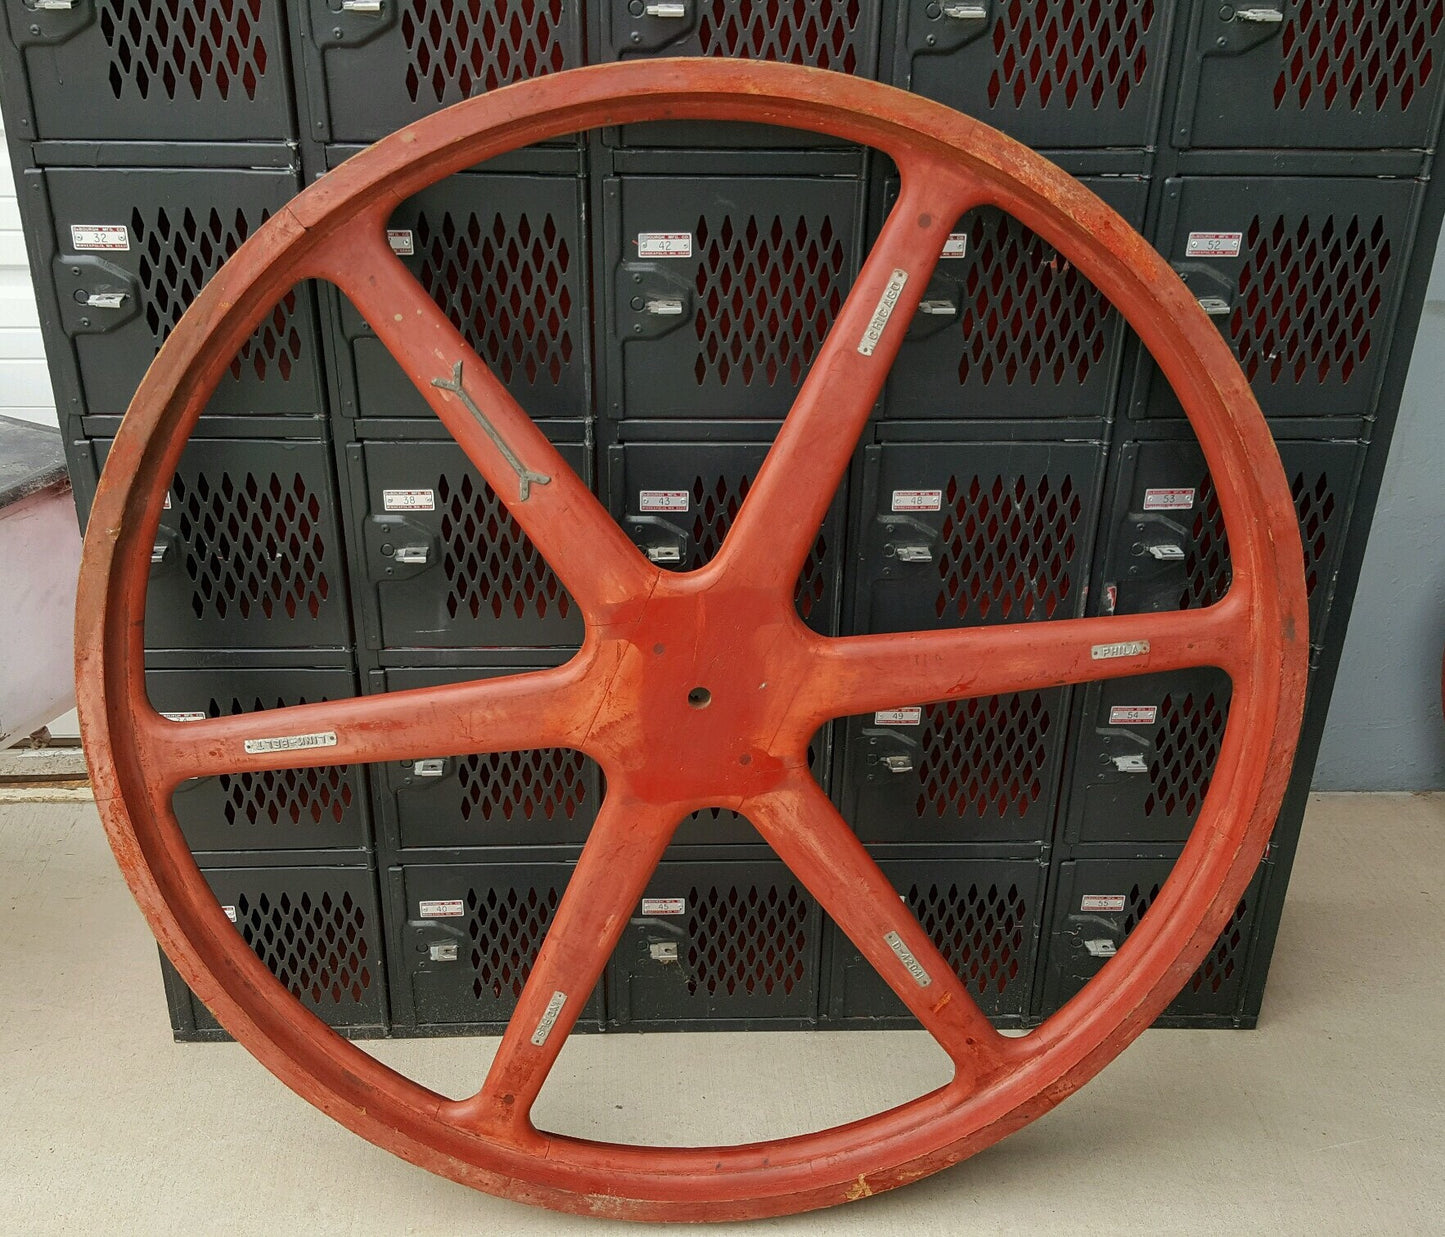 Decorative Industrial Red Wheel